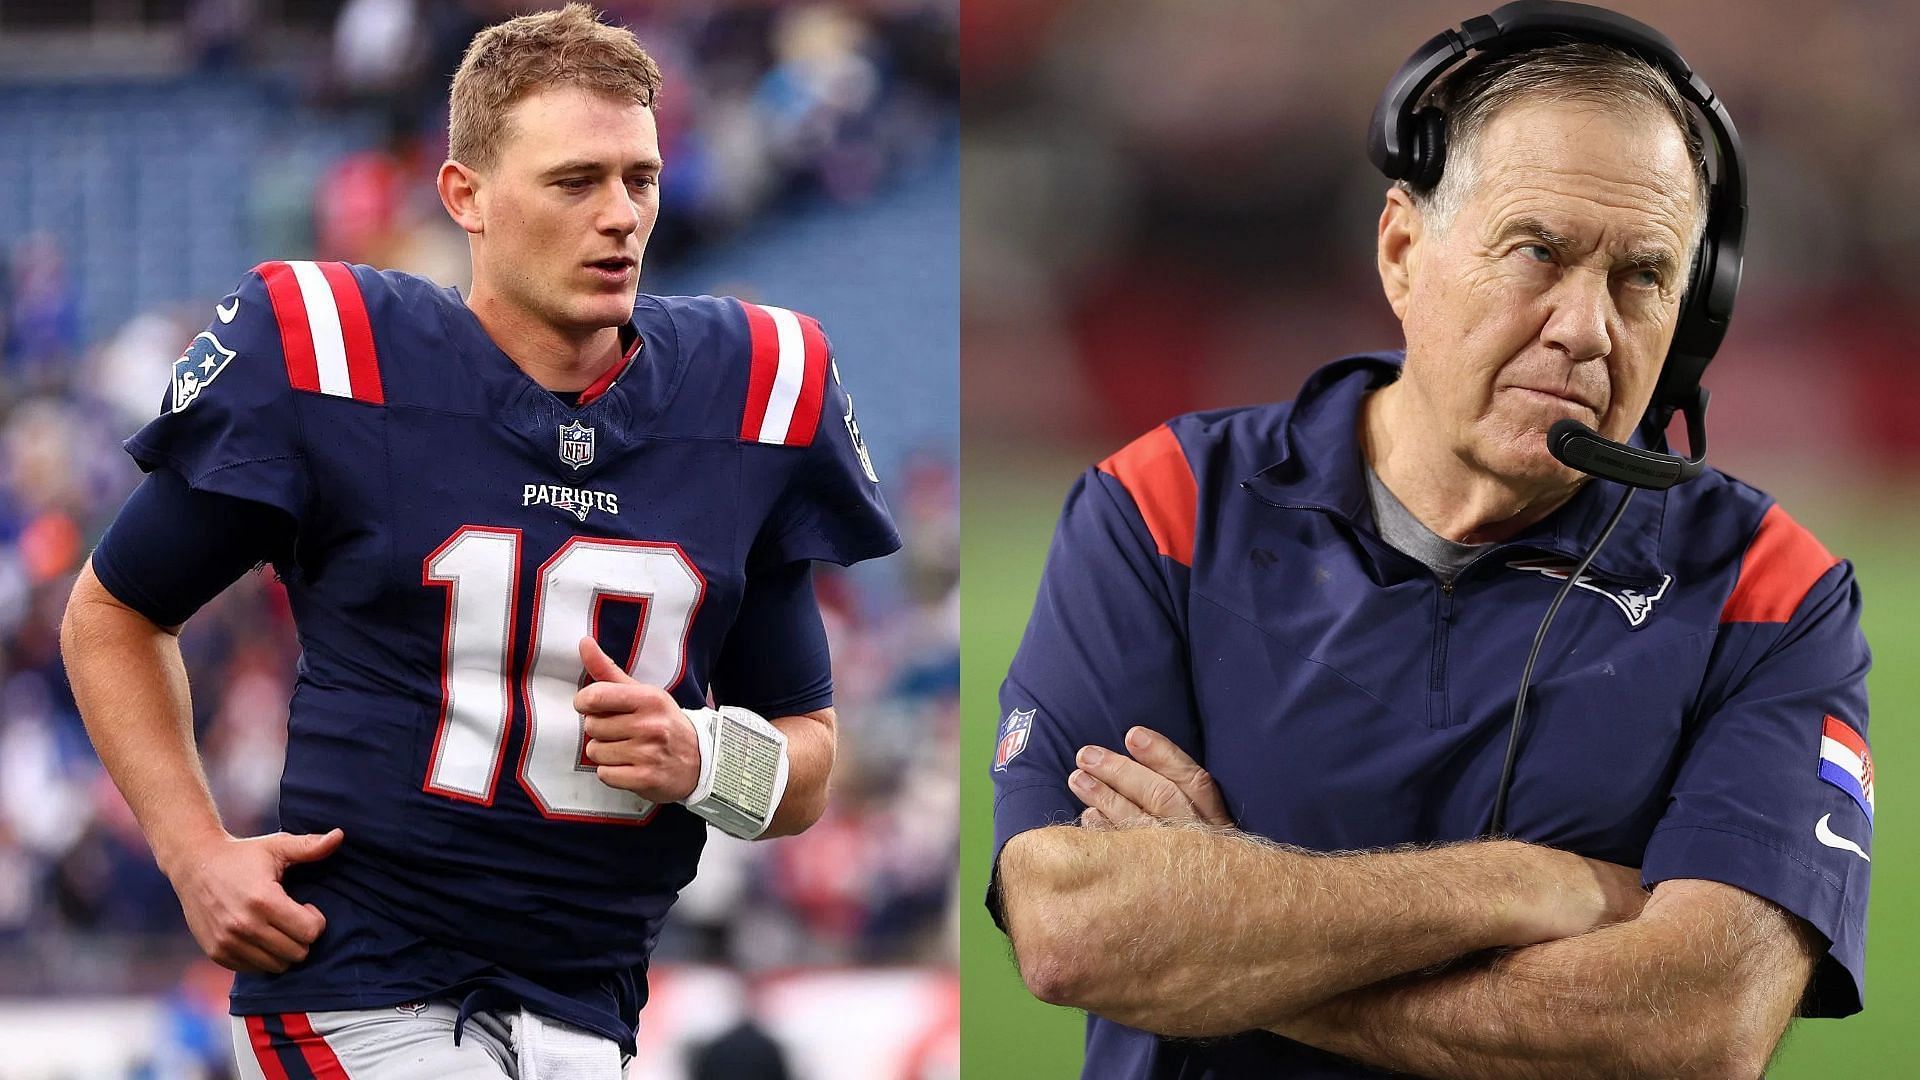 "Belichick diss track sitting on his computer": NFL fans stunned by Jaguars QB Mac Jones' hobby as a rapper